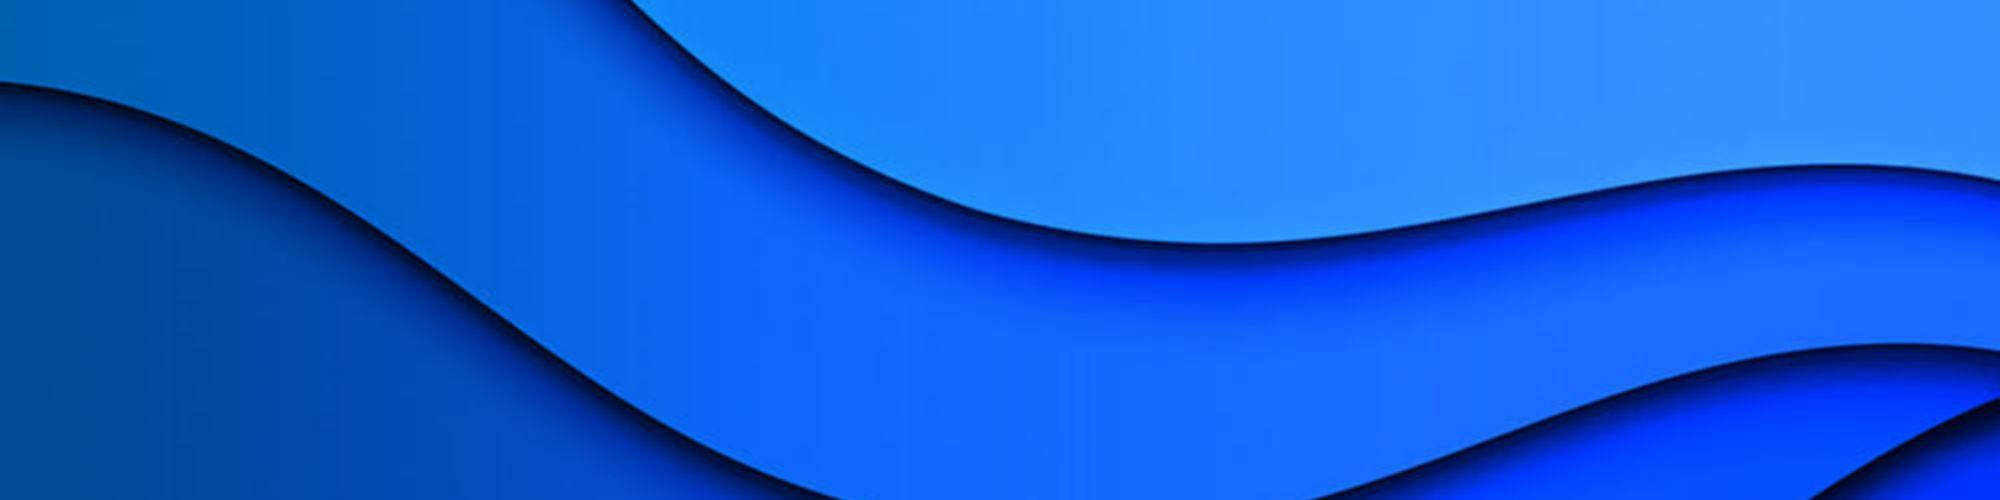 abstract-blue